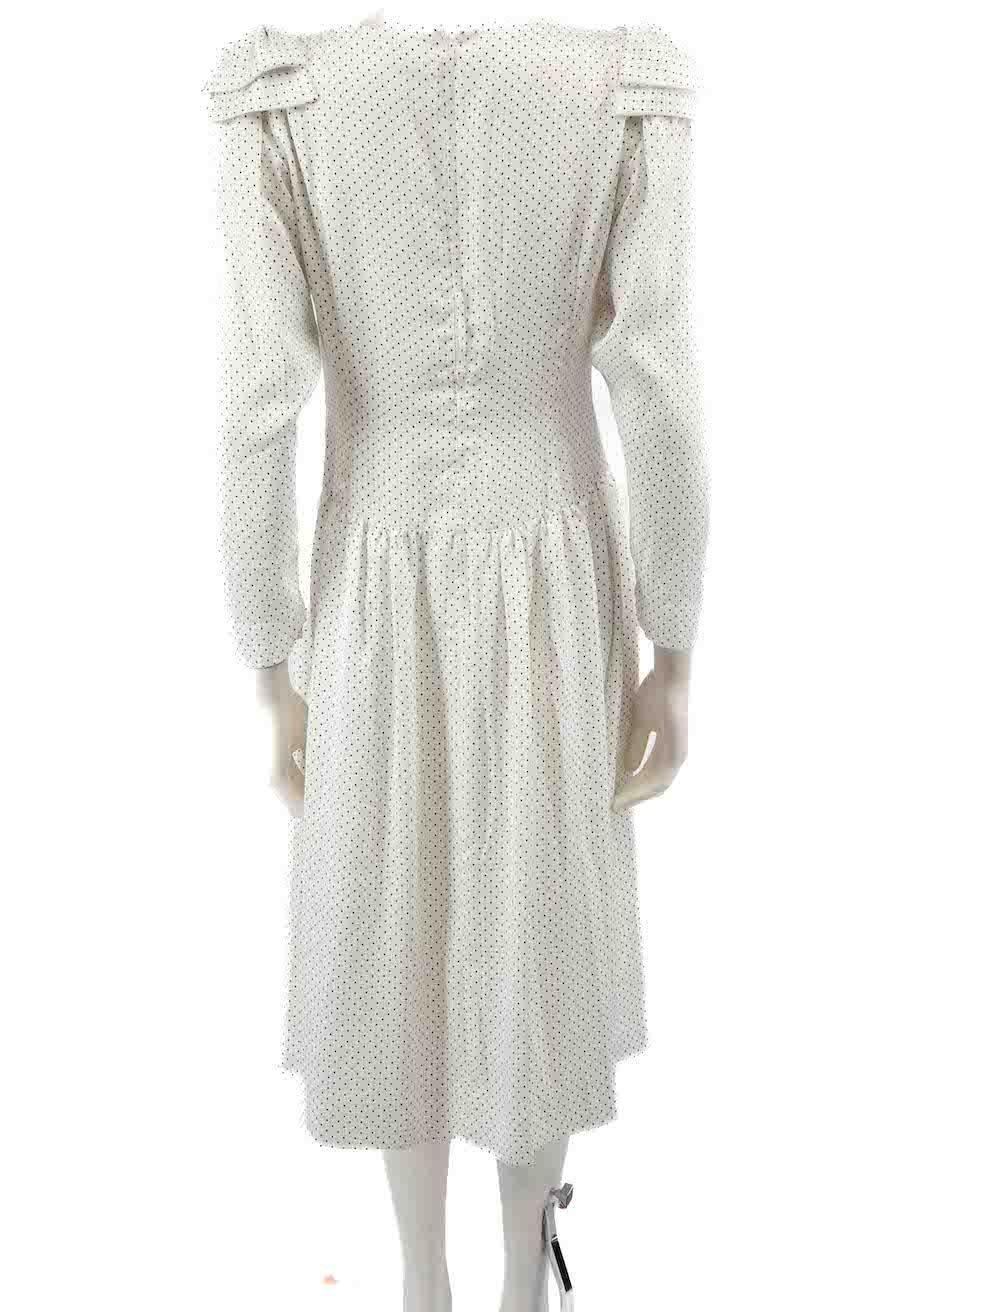 Hanae Mori White Polka Dot Long Sleeve Dress Size M In Good Condition For Sale In London, GB